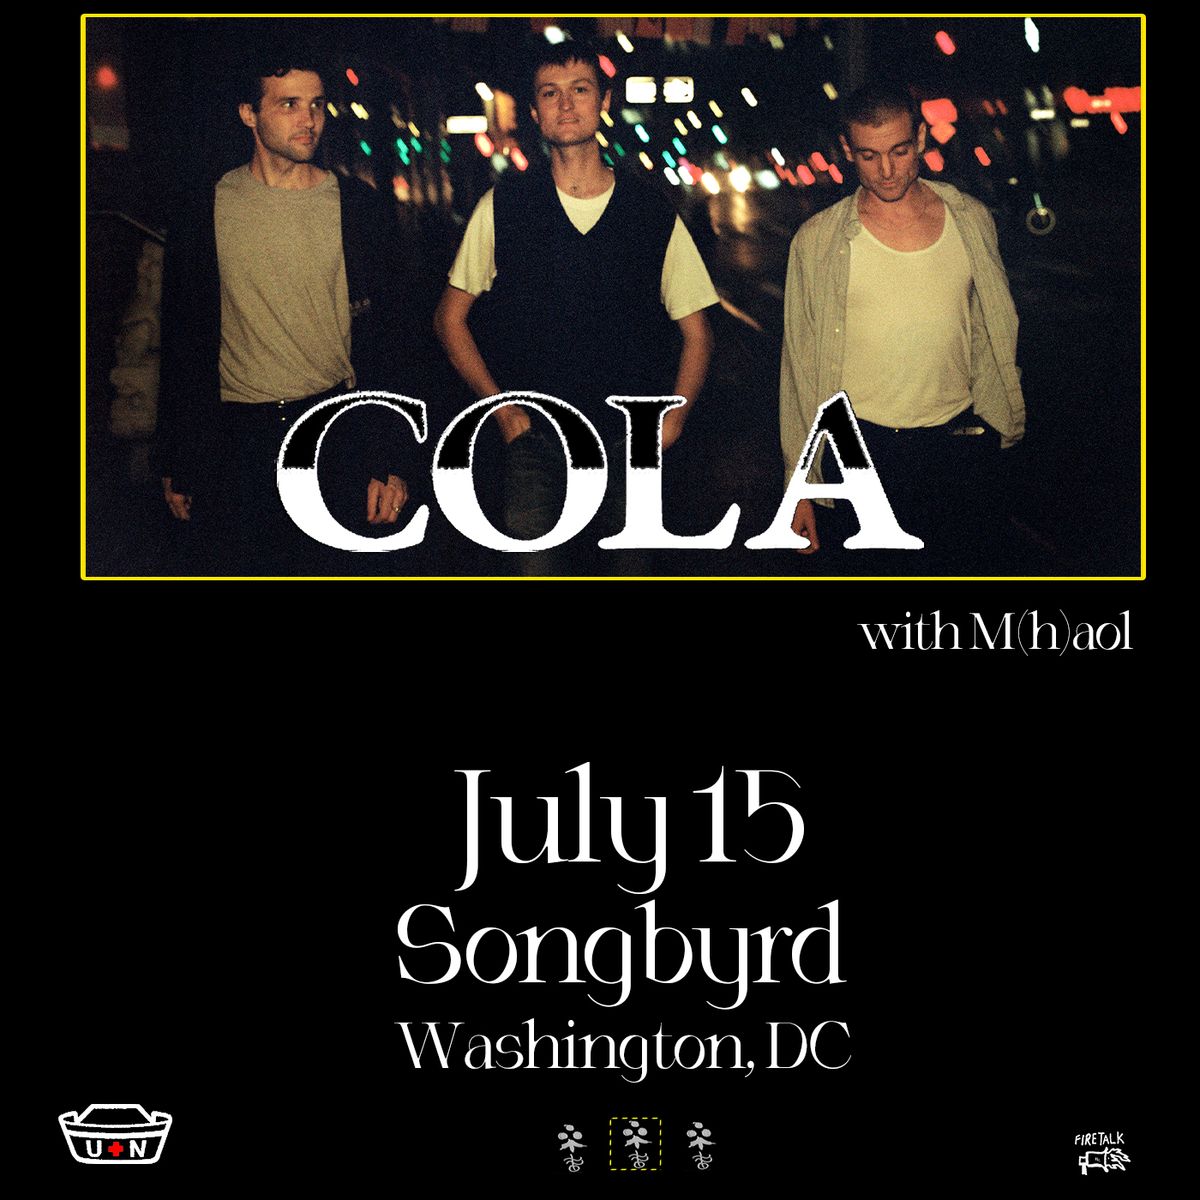 Cola - The Gloss Tour with M(h)aol at Songbyrd DC